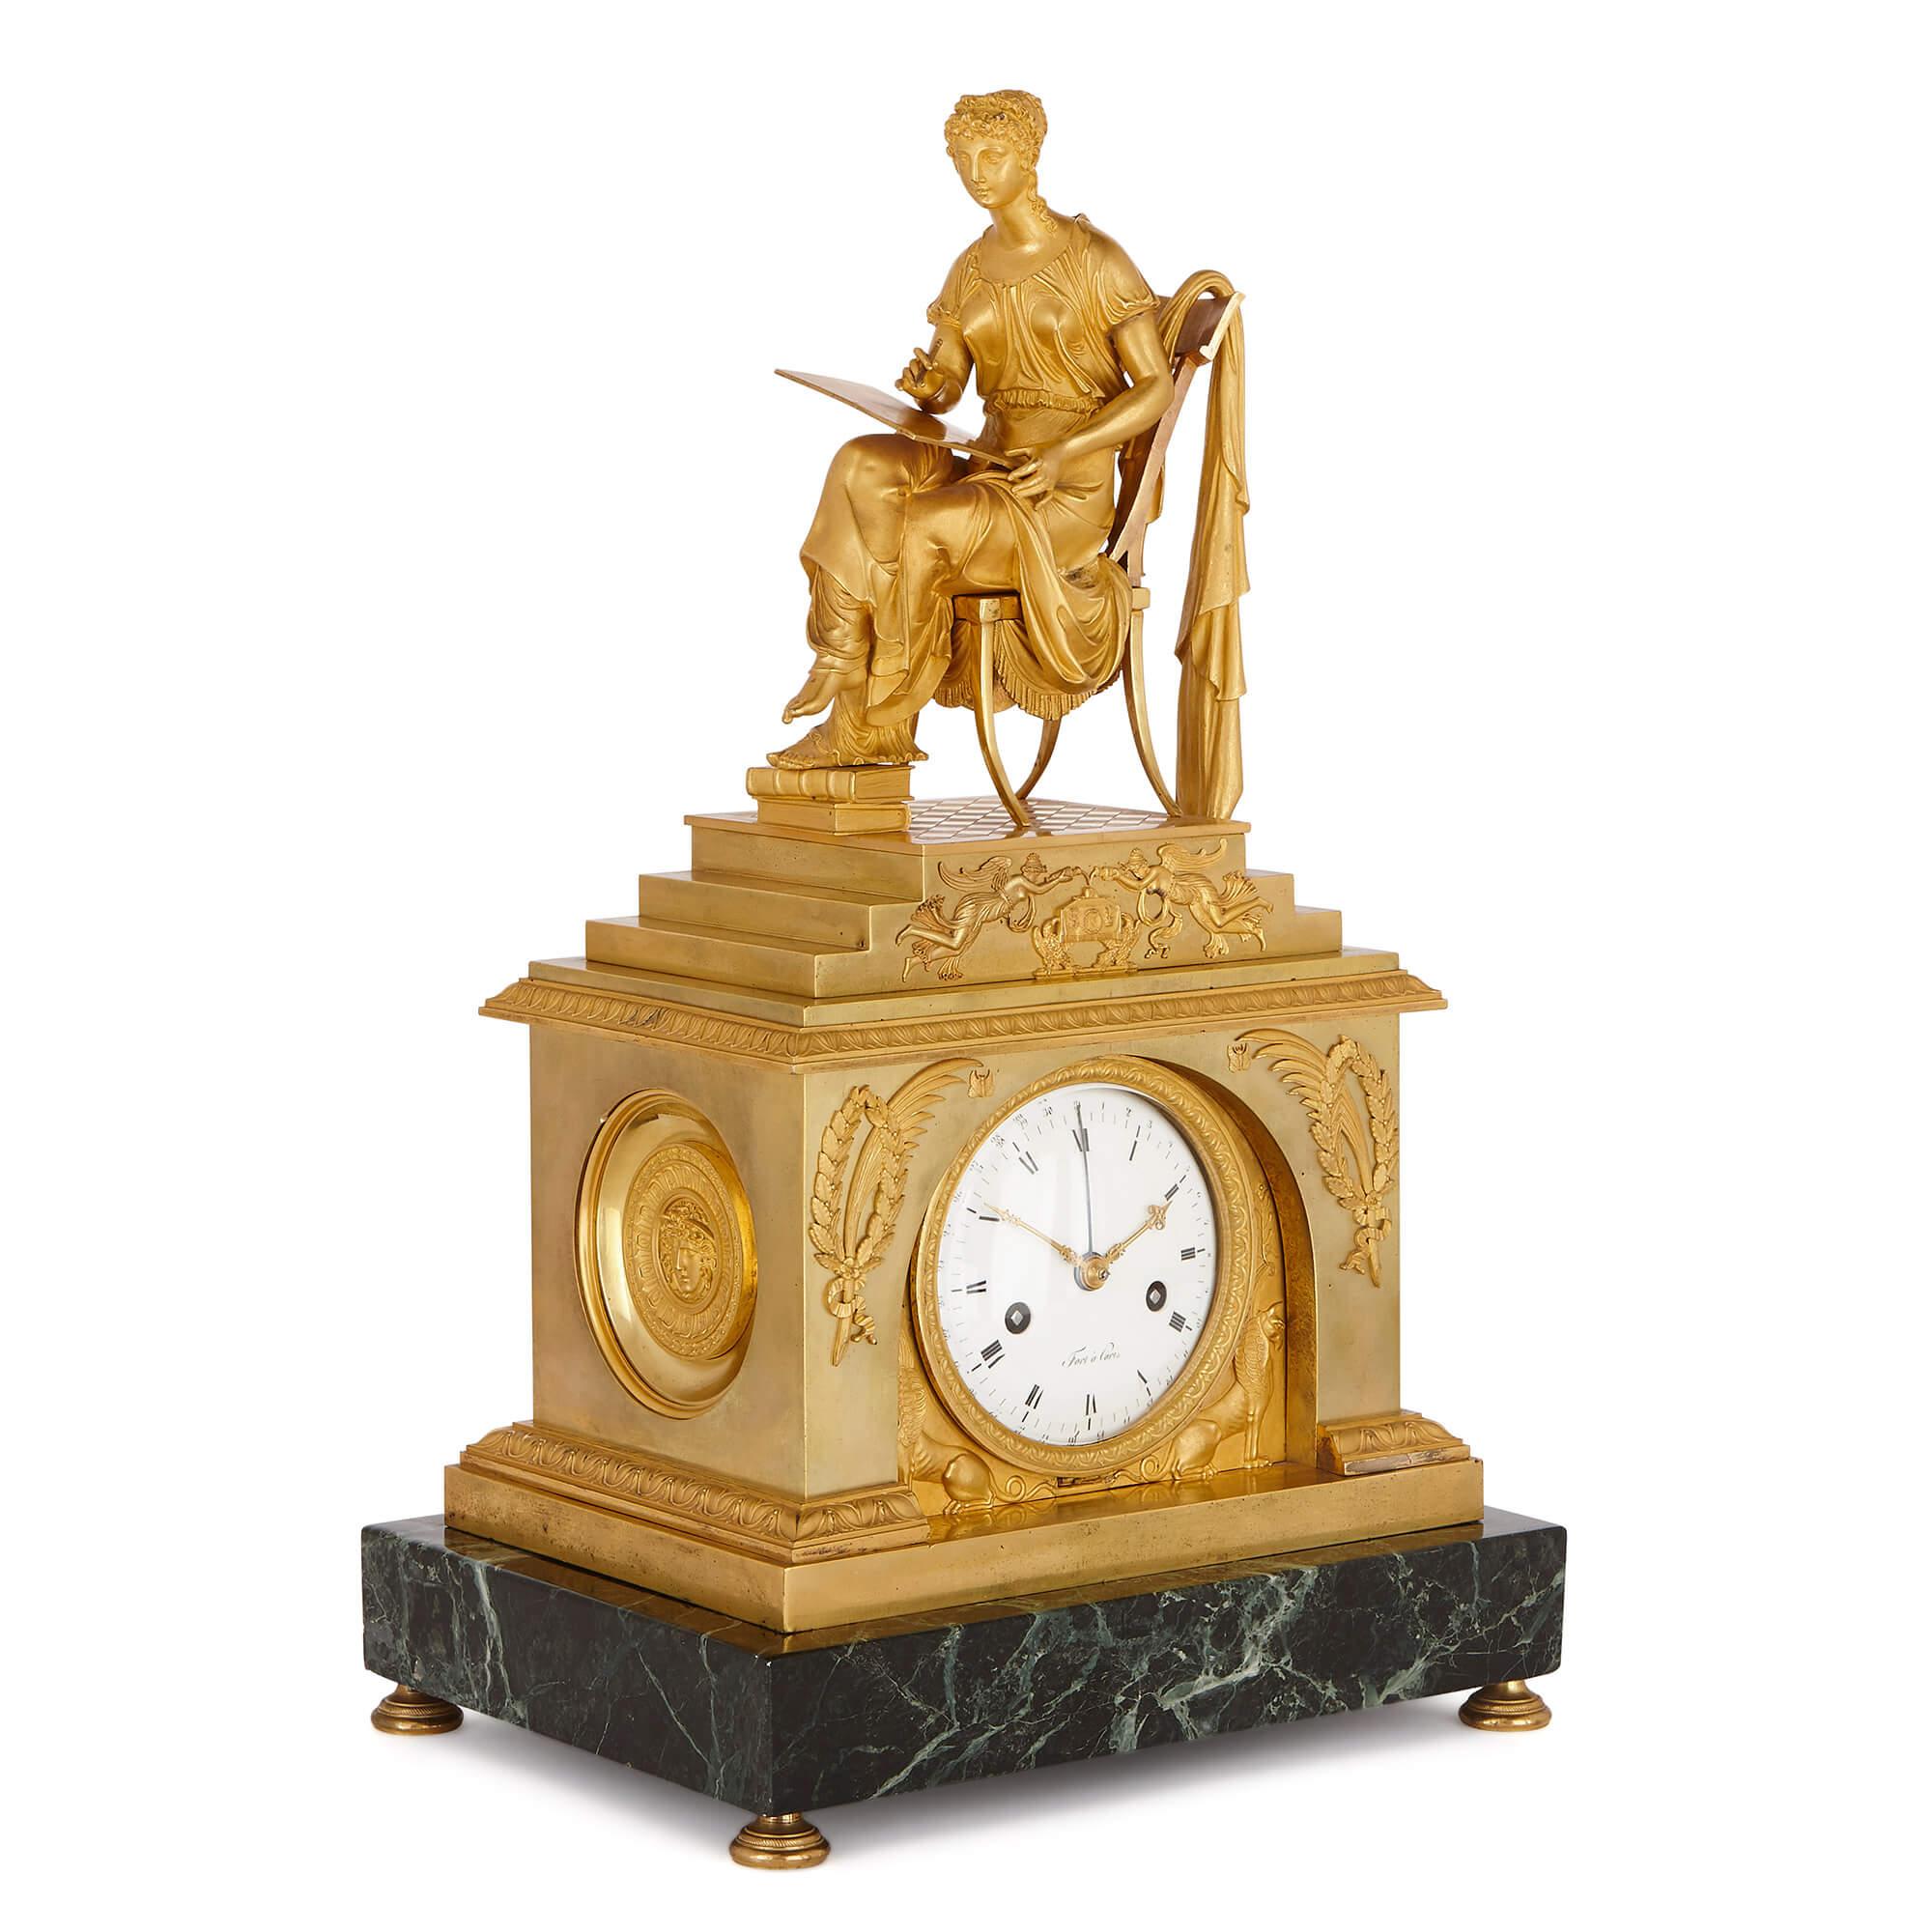 Crafted in the Empire style, this mantel clock features a rectangular green marble base, topped by a gilt bronze (ormolu) body, containing the clock dial. Surmounting this body is a stepped platform, decorated with Napoleonic symbols, upon which a